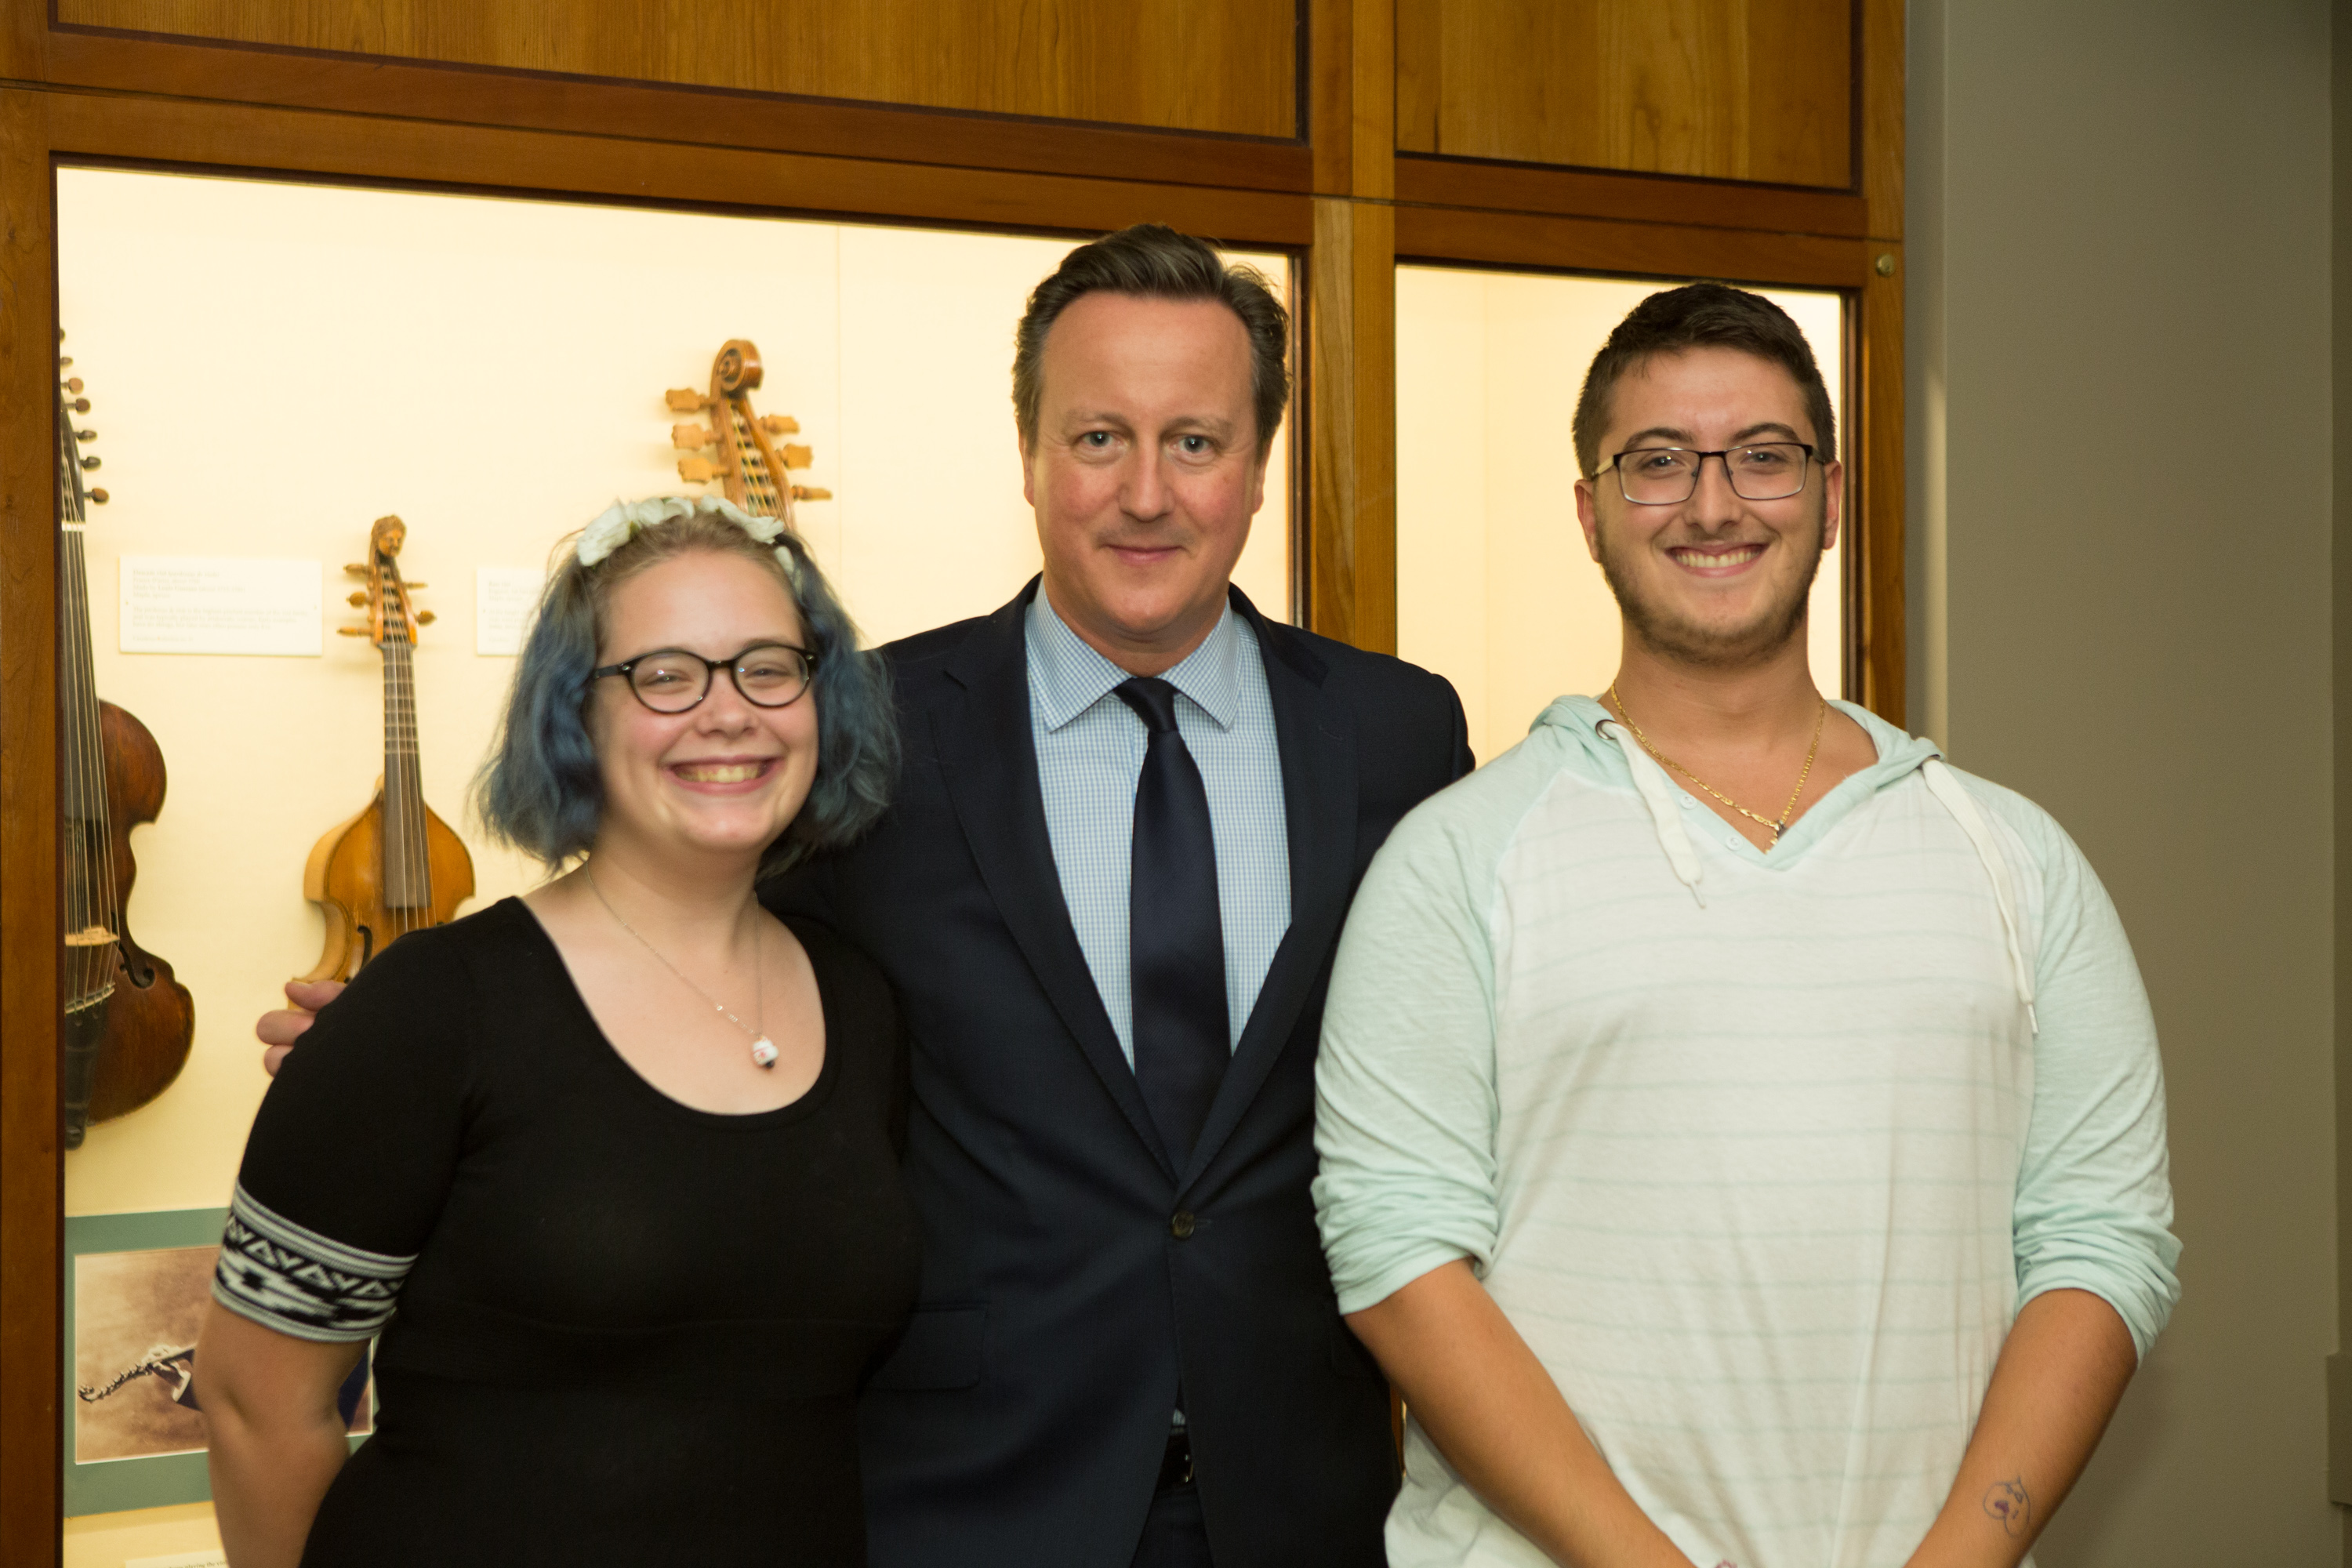 David Cameron, Camryn Vevilacqua, and Jonathan Cunha posing together for a picture